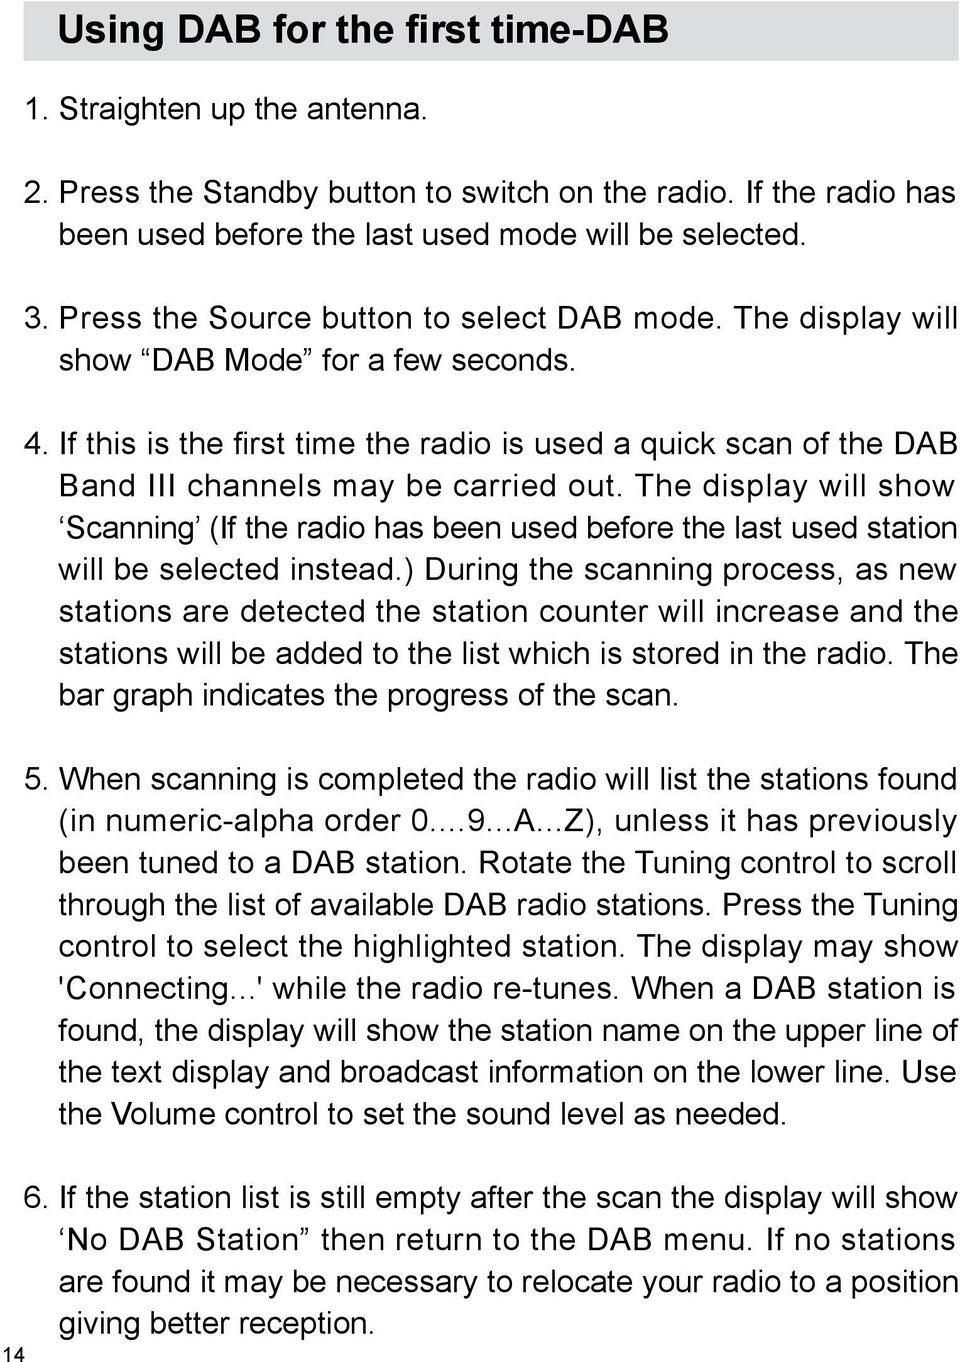 If this is the first time the radio is used a quick scan of the DAB Band III channels may be carried out.